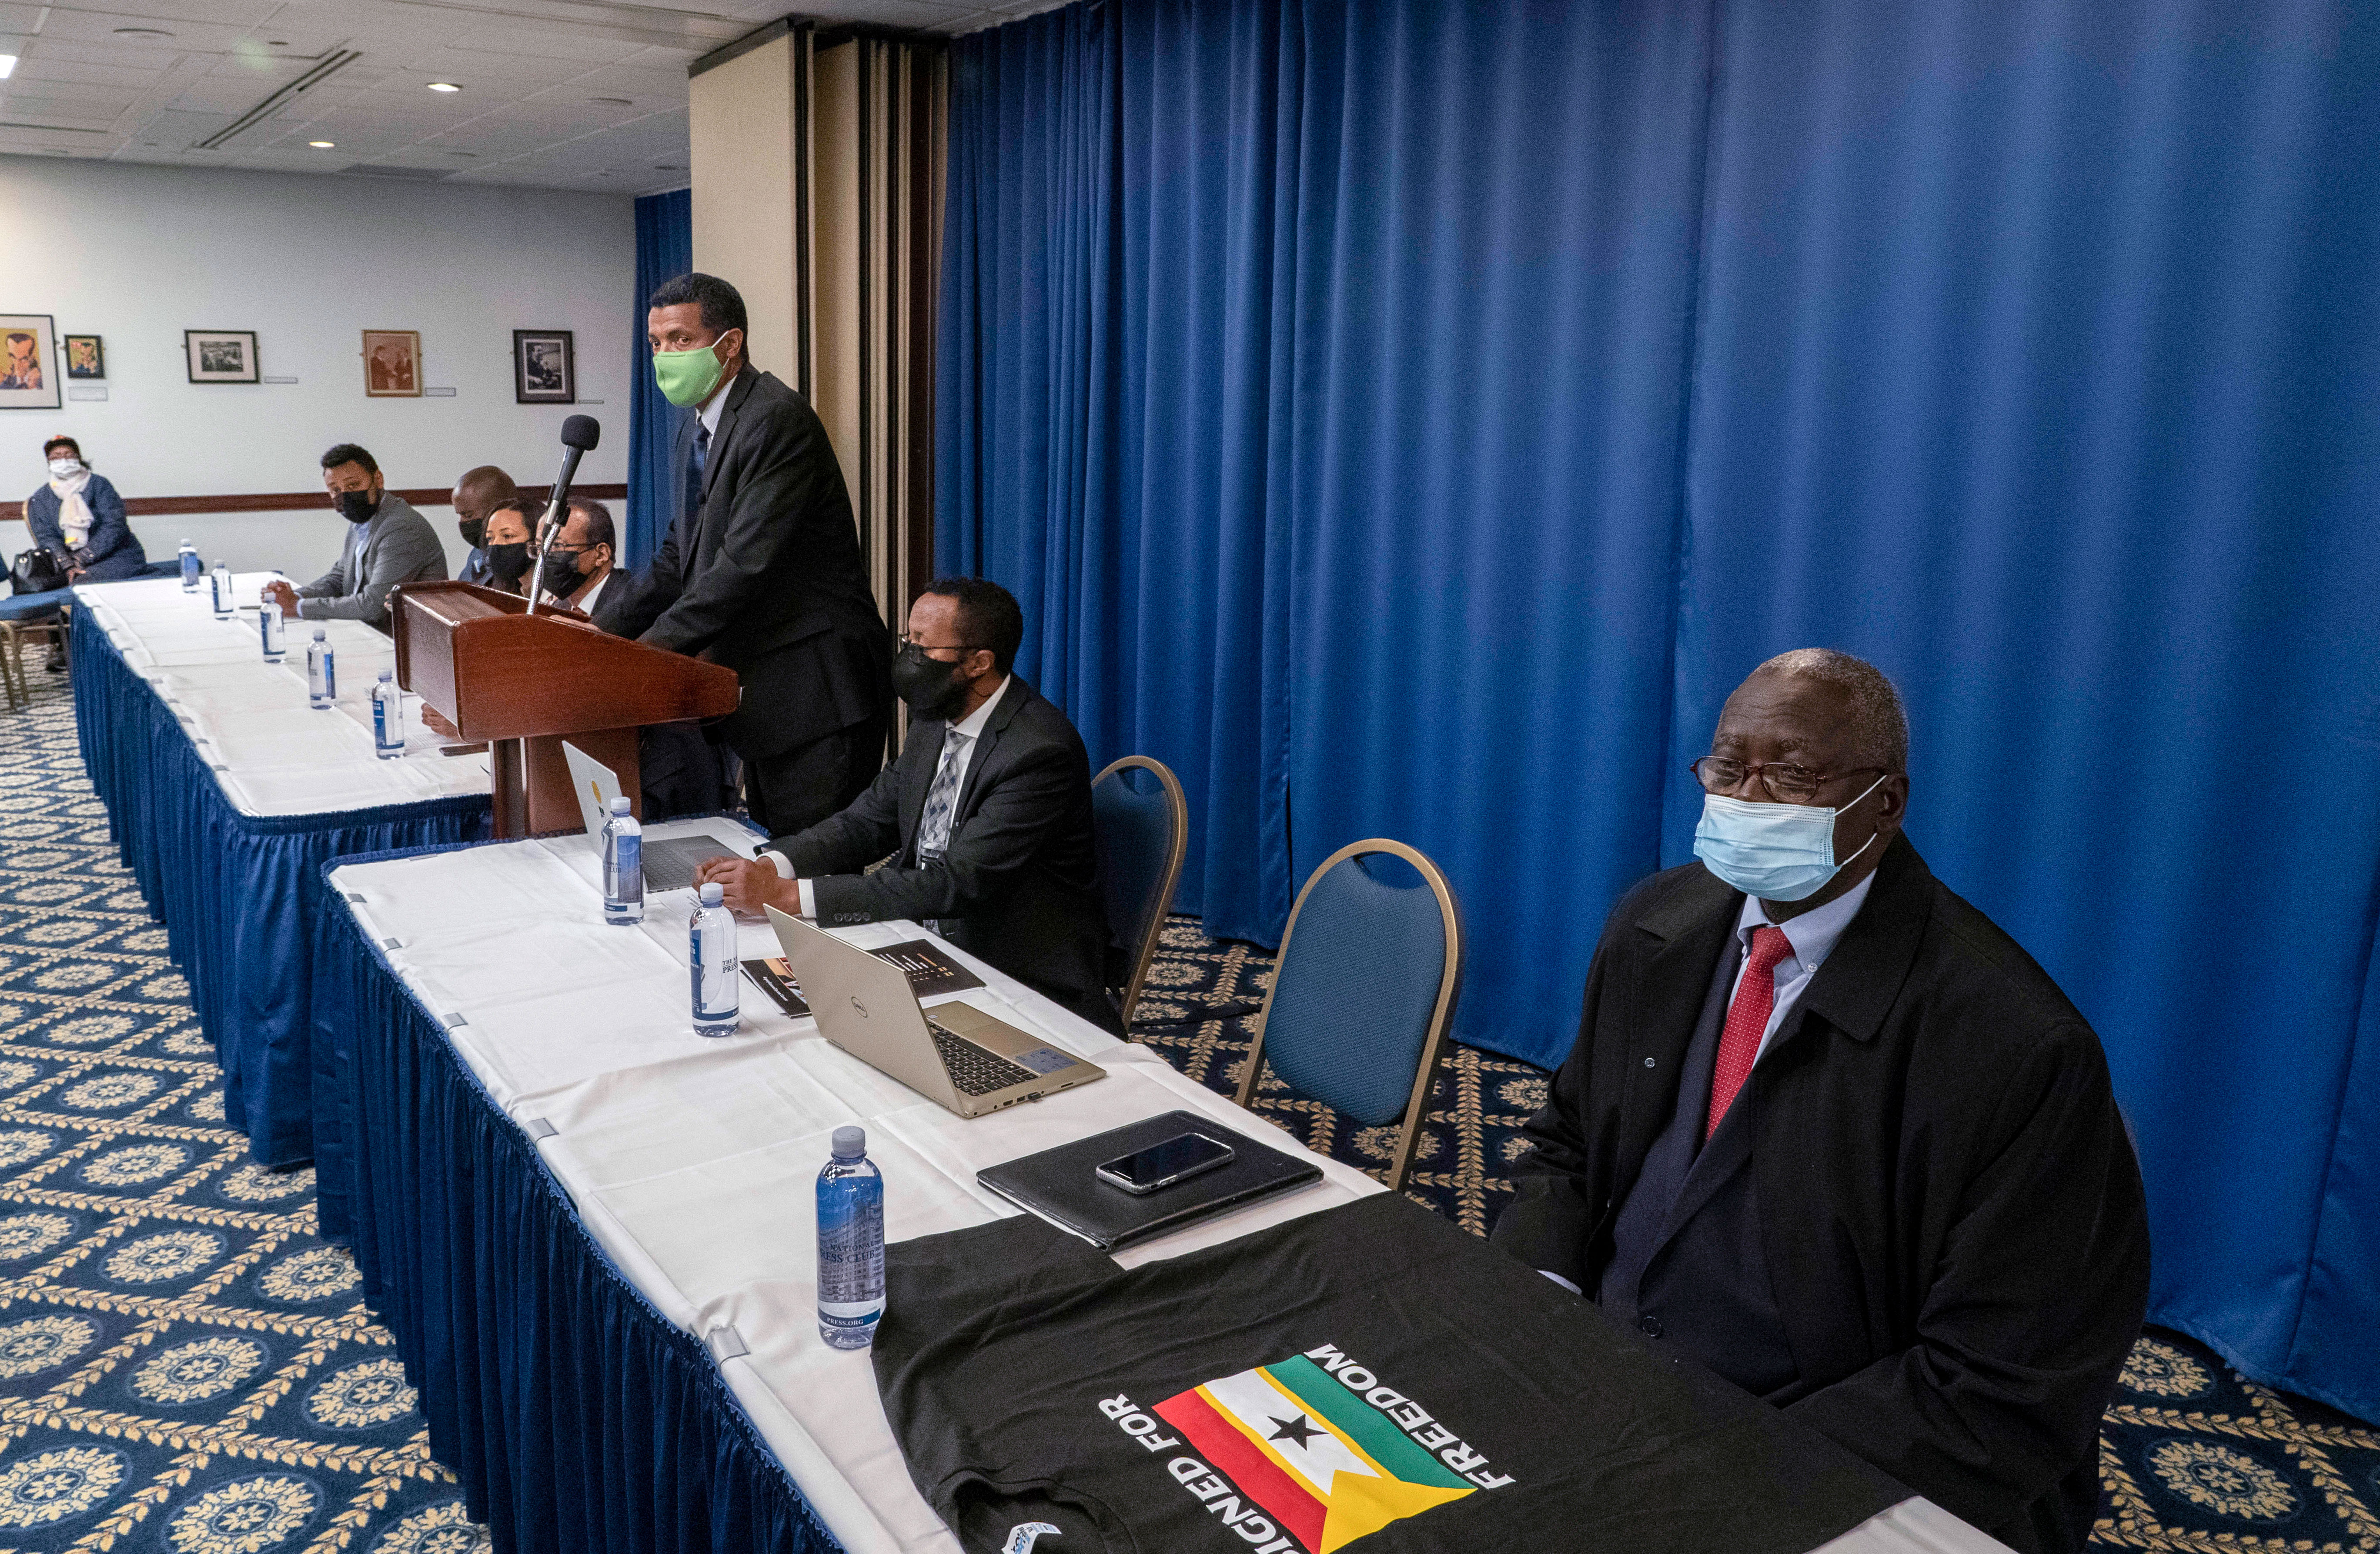 Admassu Tsegaye, center, speaks during a signing ceremony of the United Front of Ethiopian Federalist and Confederalist forces in Washington, DC, on November 5.